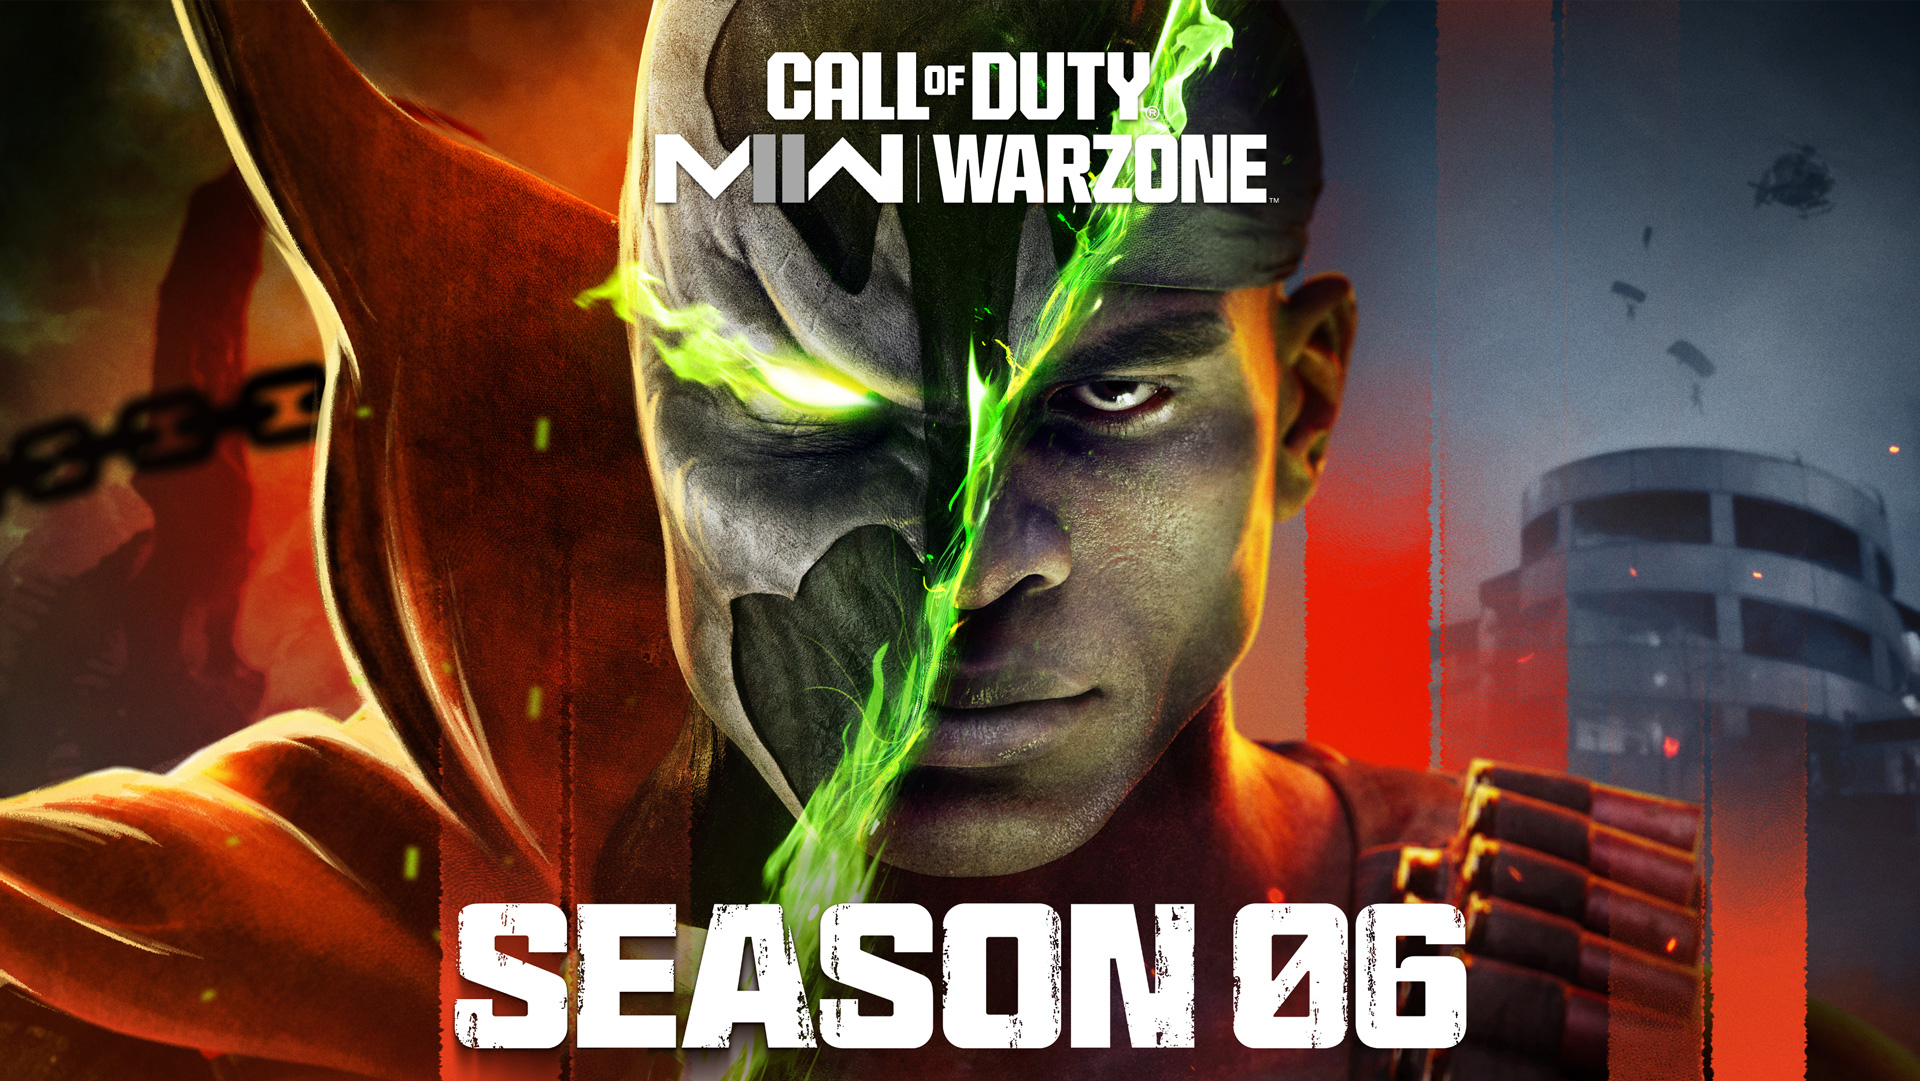 Call of Duty MW2/Warzone 2 Battle Pass: Rewards & Overview